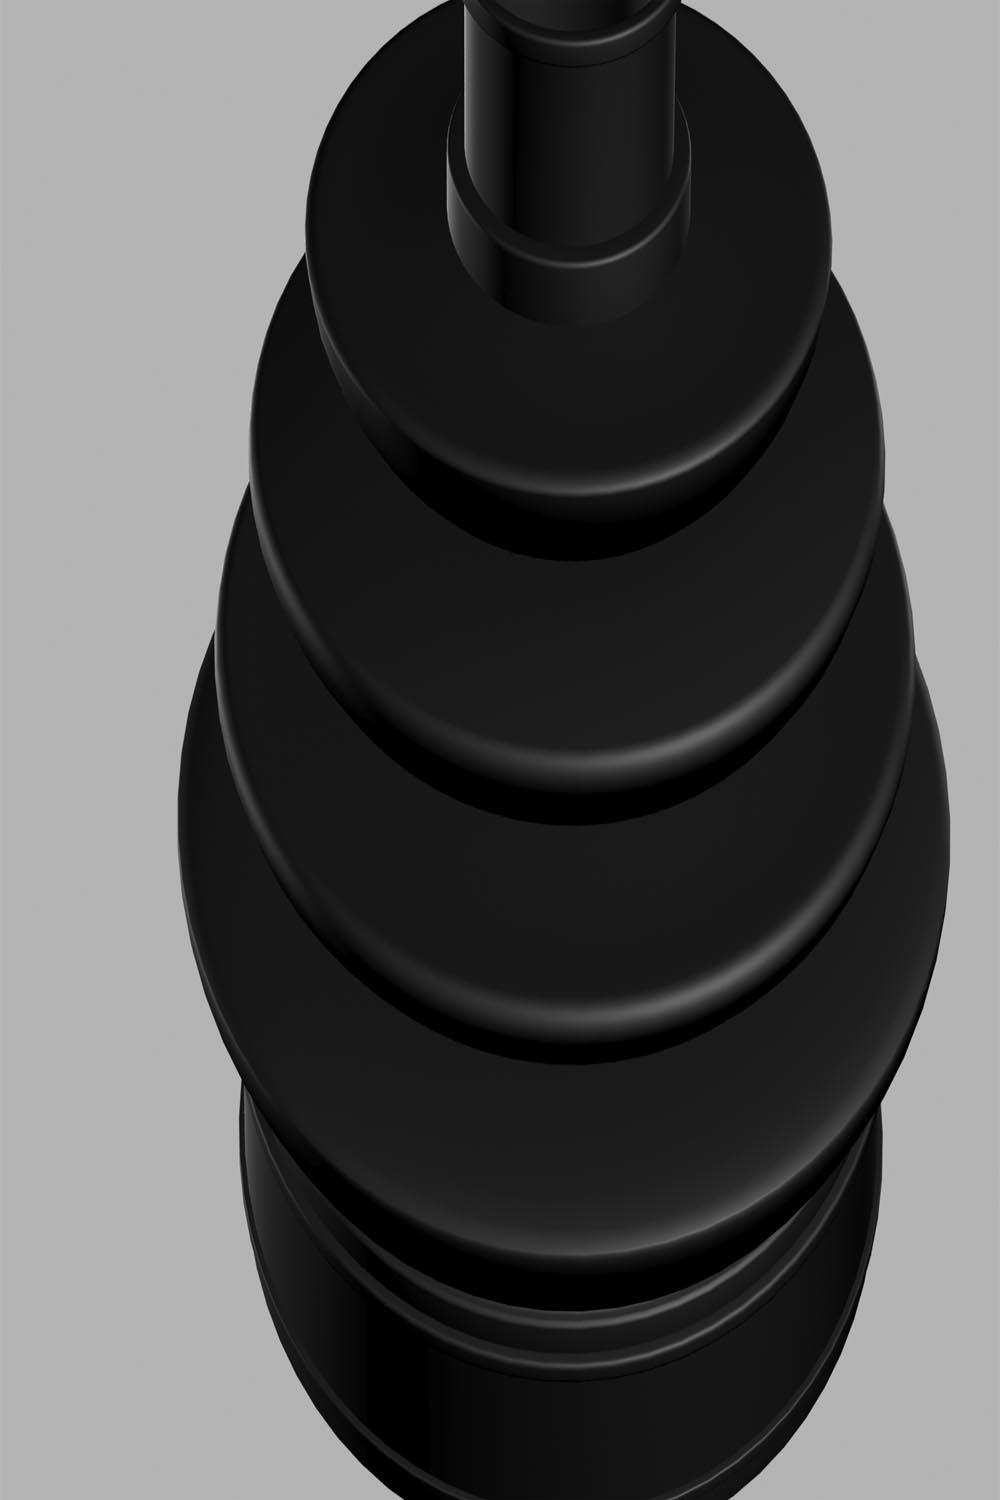 drive shaft boot for automobiles 3d illustration pinterest preview image.